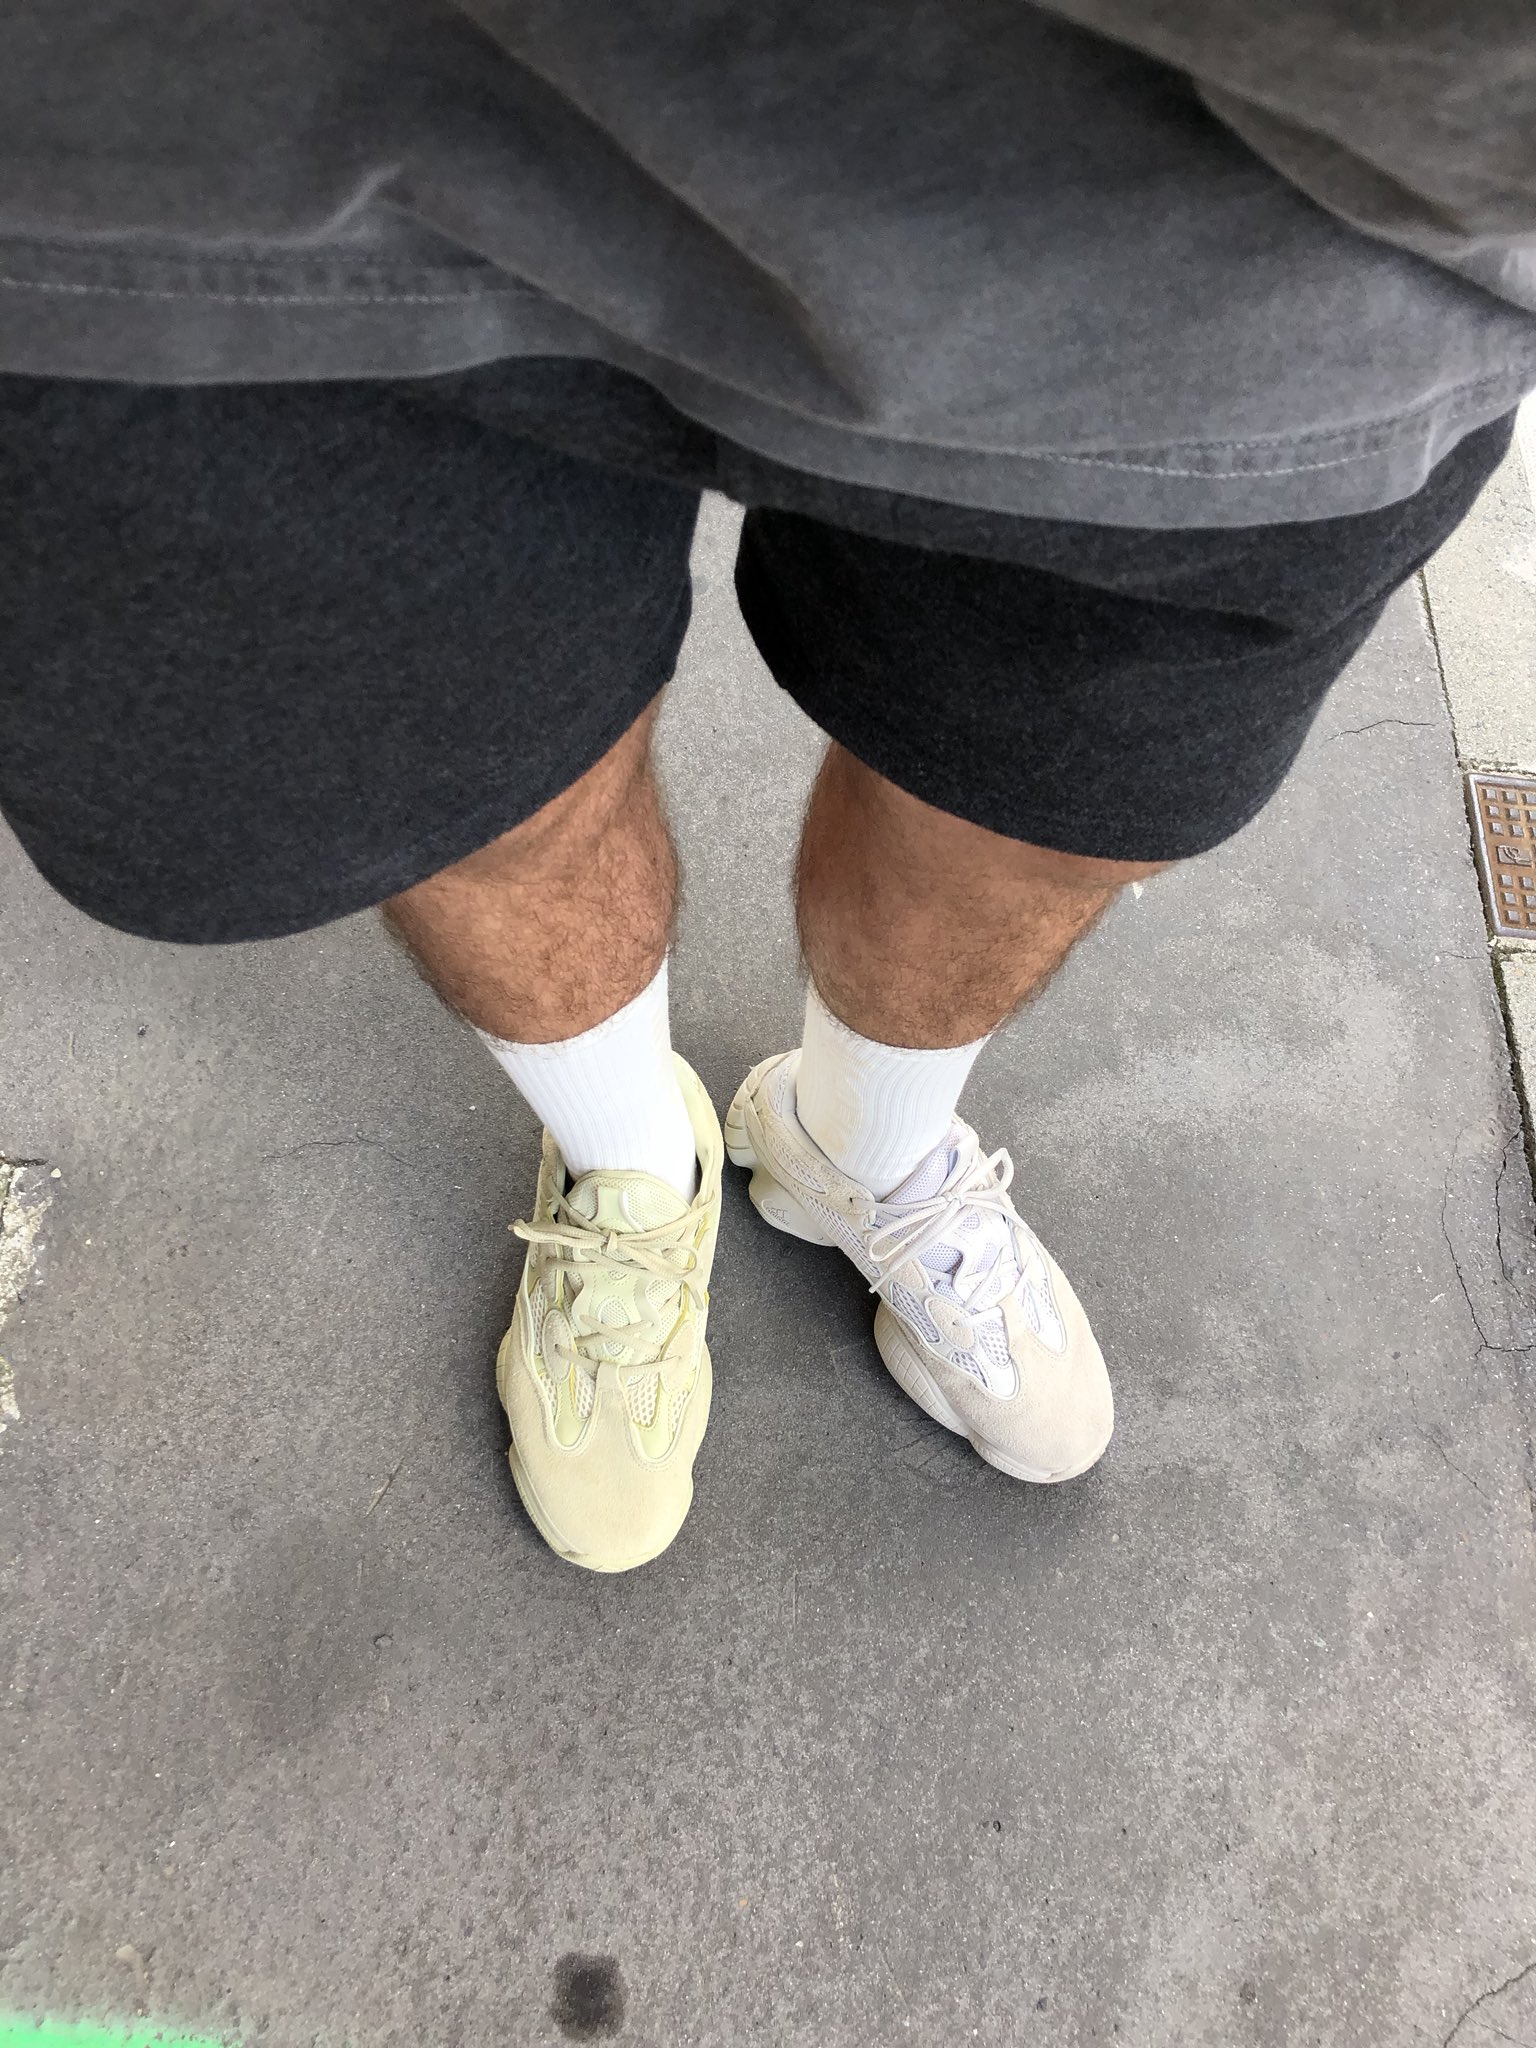 Asien Gnide medarbejder YEEZY MAFIA on Twitter: "YEEZY 500 BLUSH vs SUPER MOON YELLOW COMPARISON  What's your favorite ? https://t.co/gXC7XiINIU" / Twitter